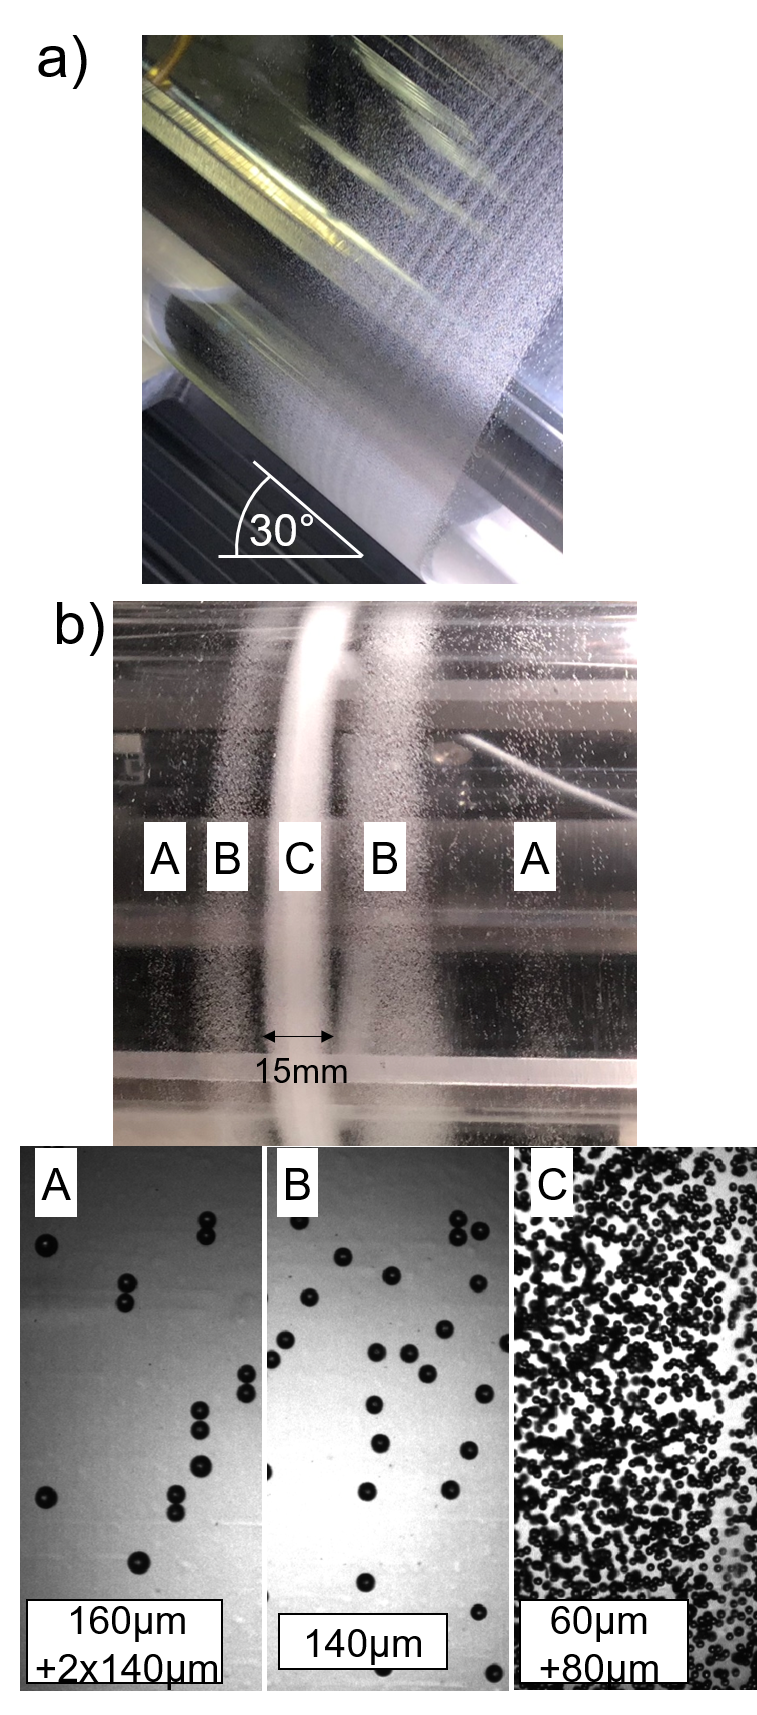 Figure 2: Particle belts in the TC cell. a) Particle separation eﬀect, b) striped tapes with an angle of inclination of 30 degrees